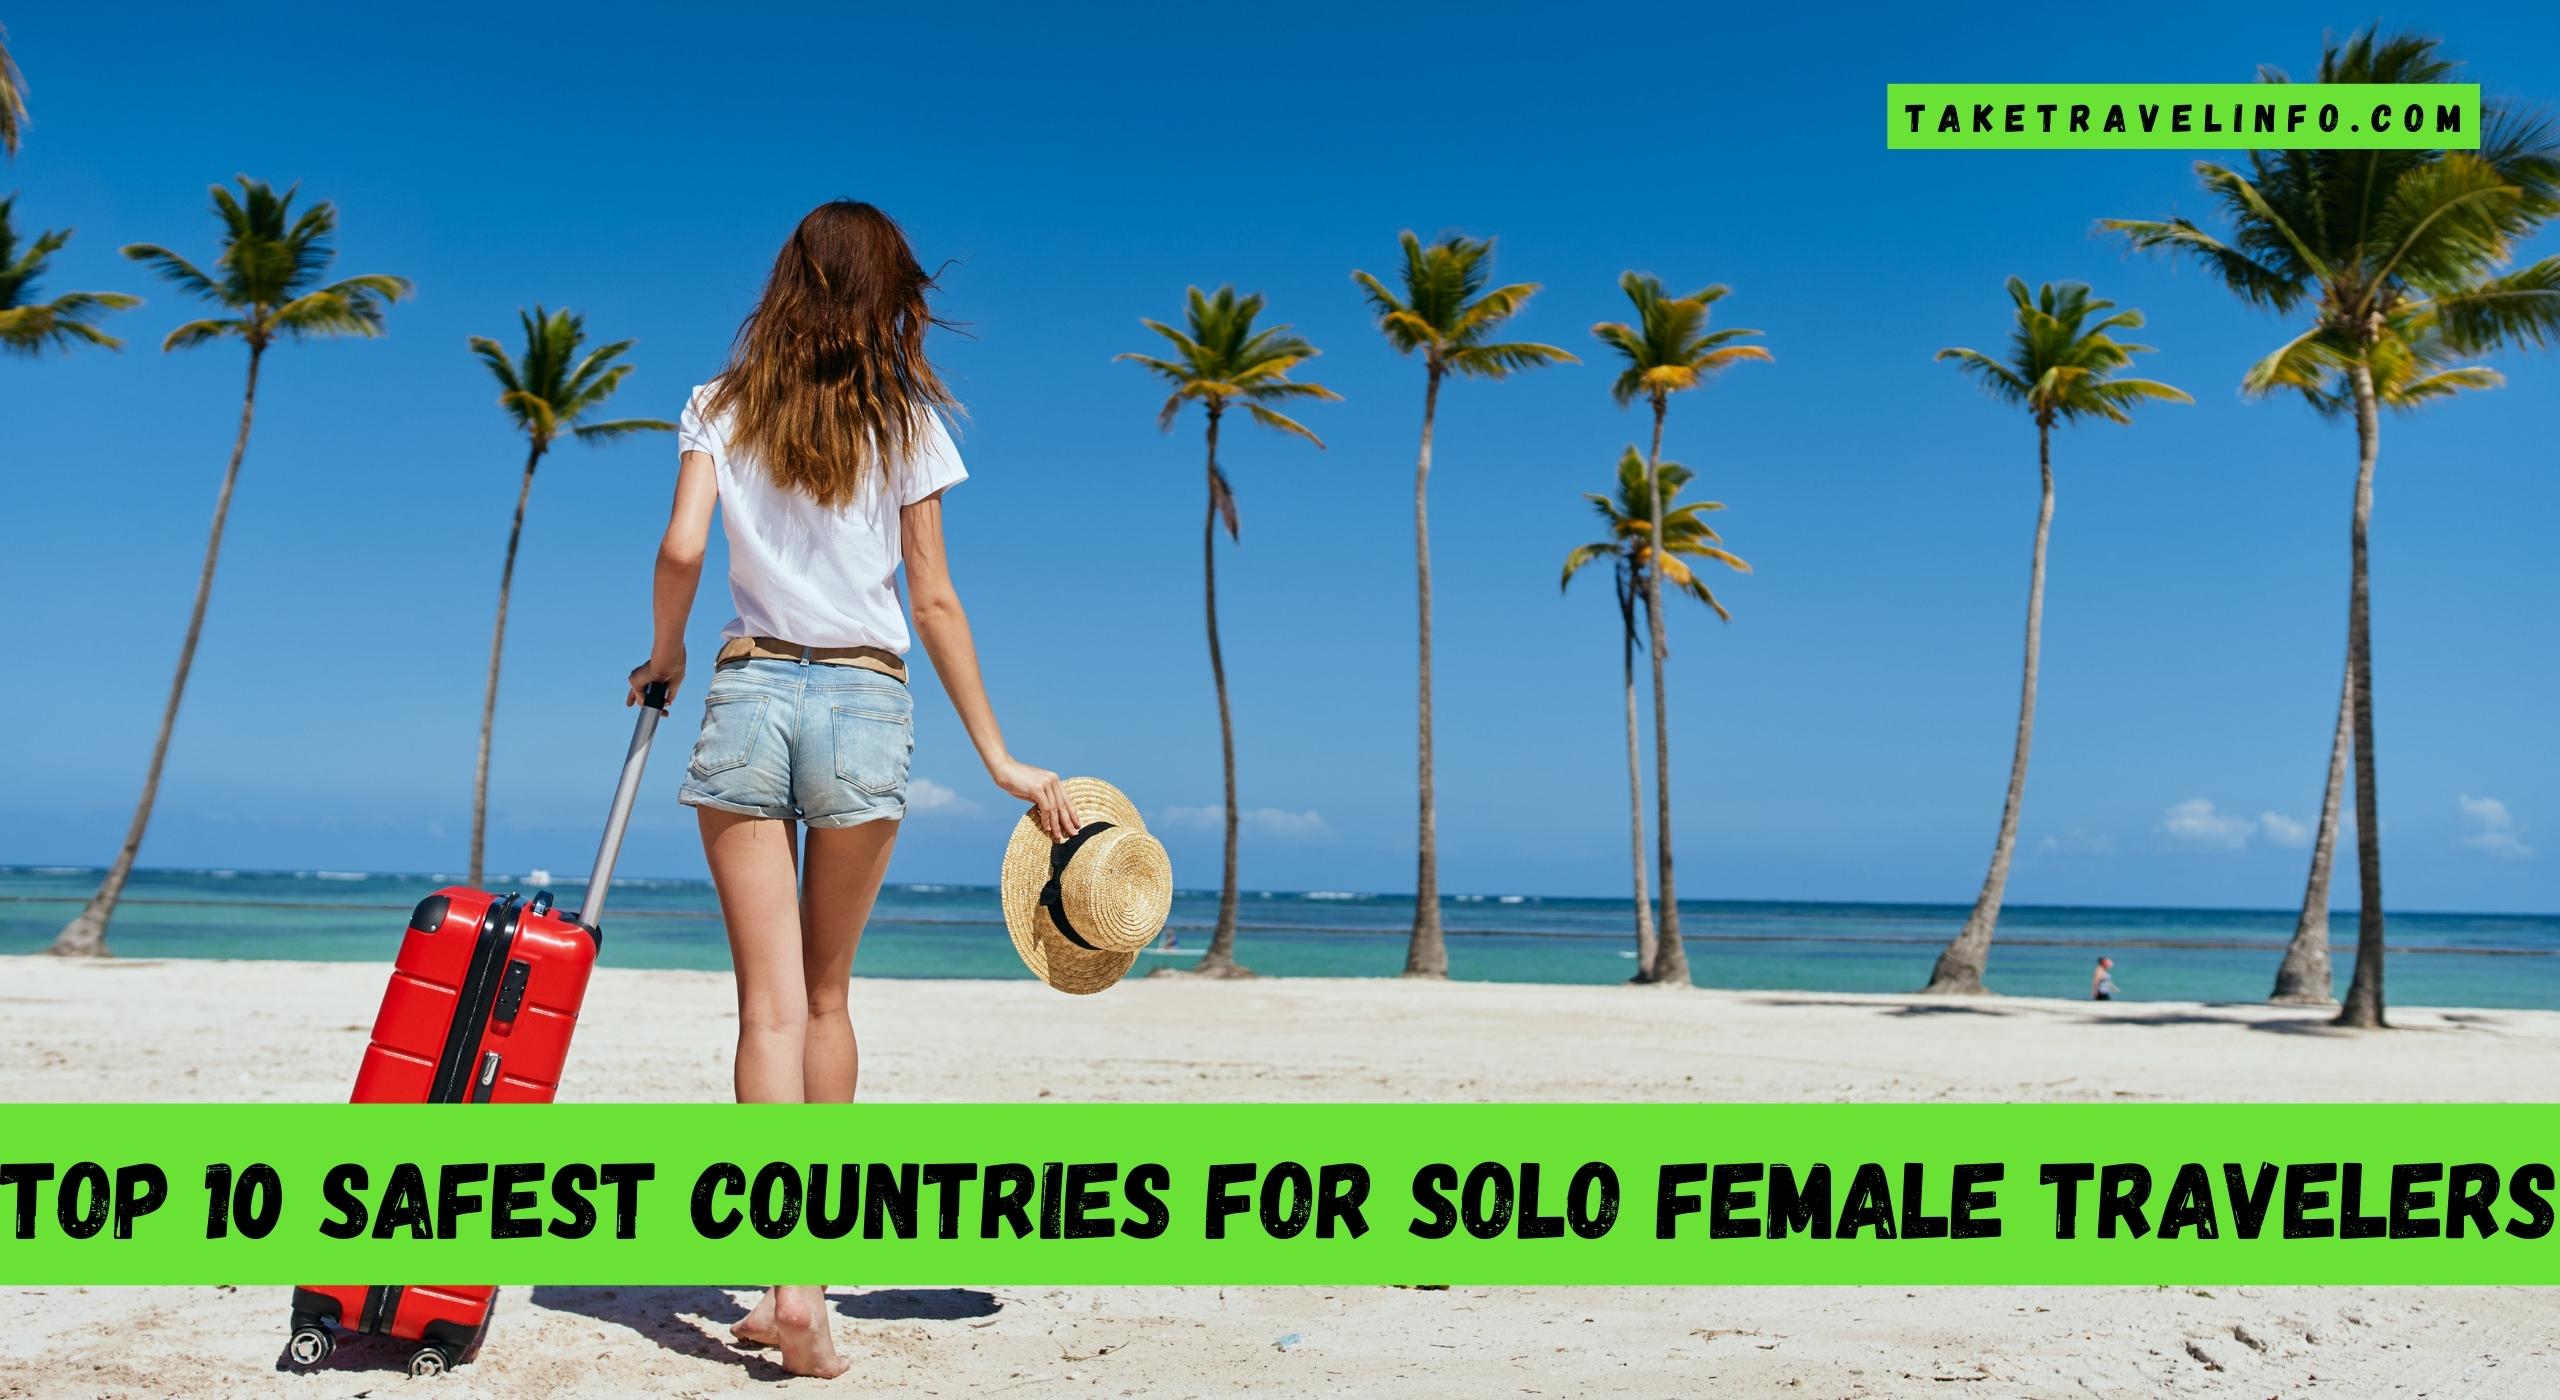 Top 10 Safest Countries For Solo Female Travelers